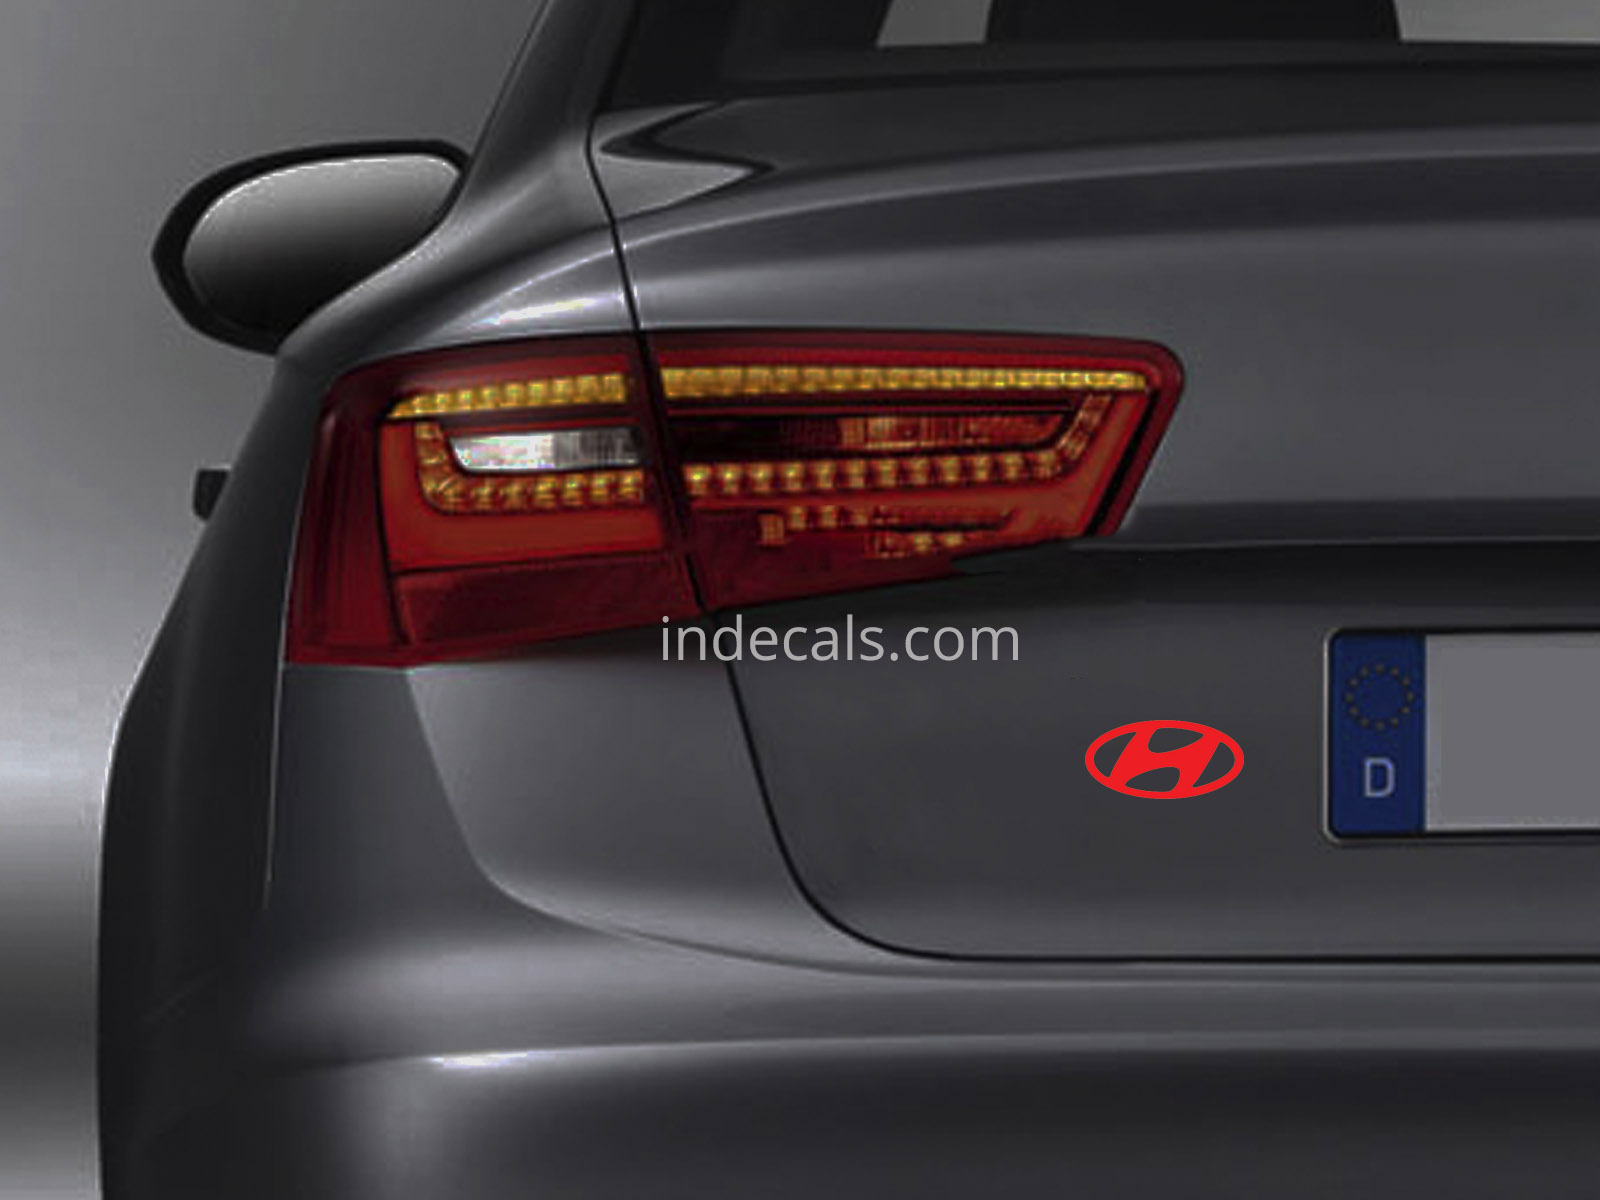 3 x Hyundai Stickers for Trunk - Red